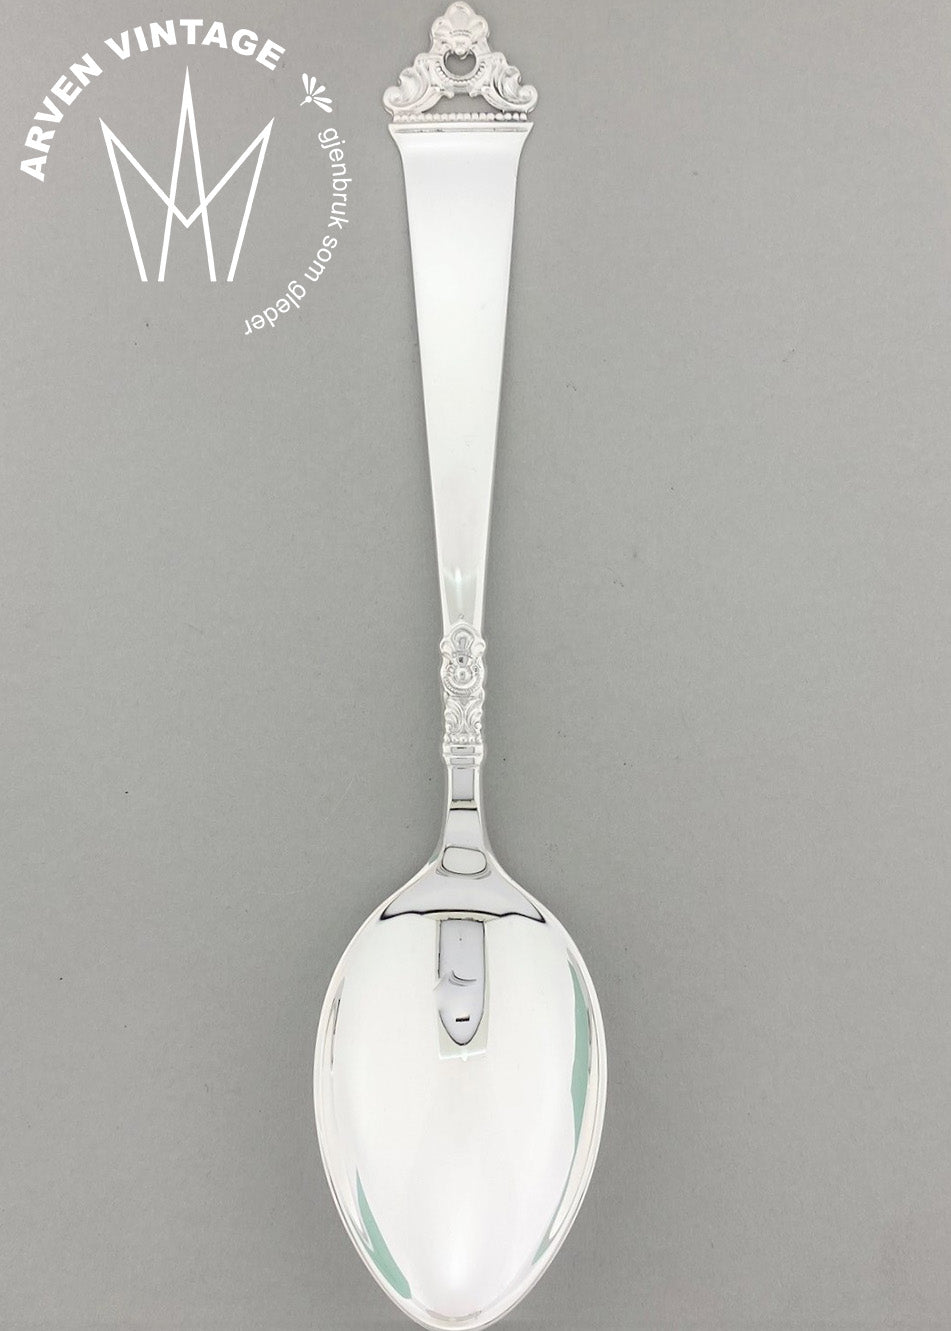 Vintage Odel small tablespoon with engraving